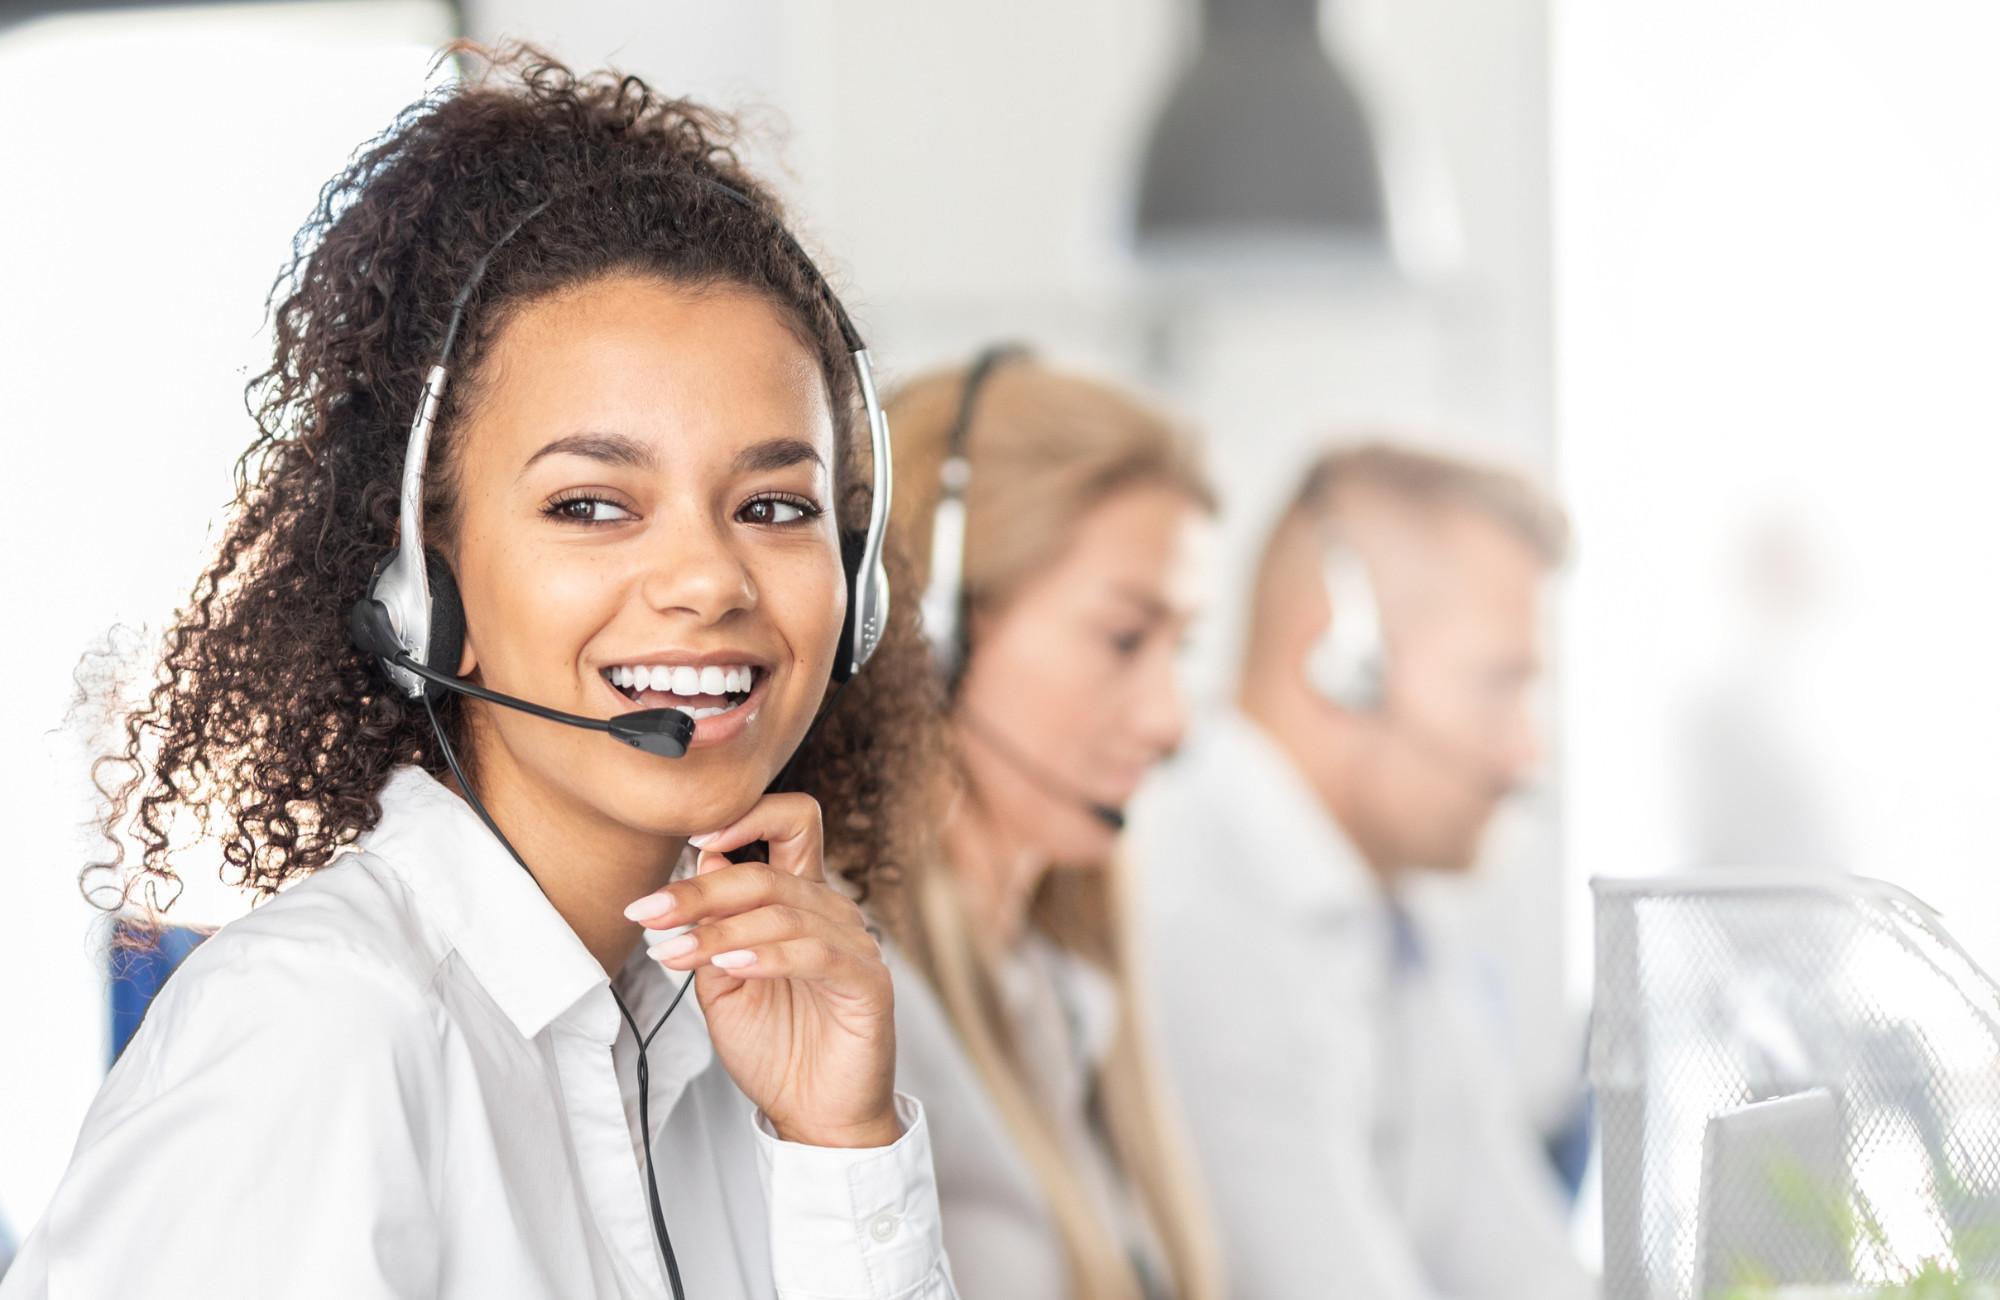 Smiling woman wearing a headset ready to take your customer service call.